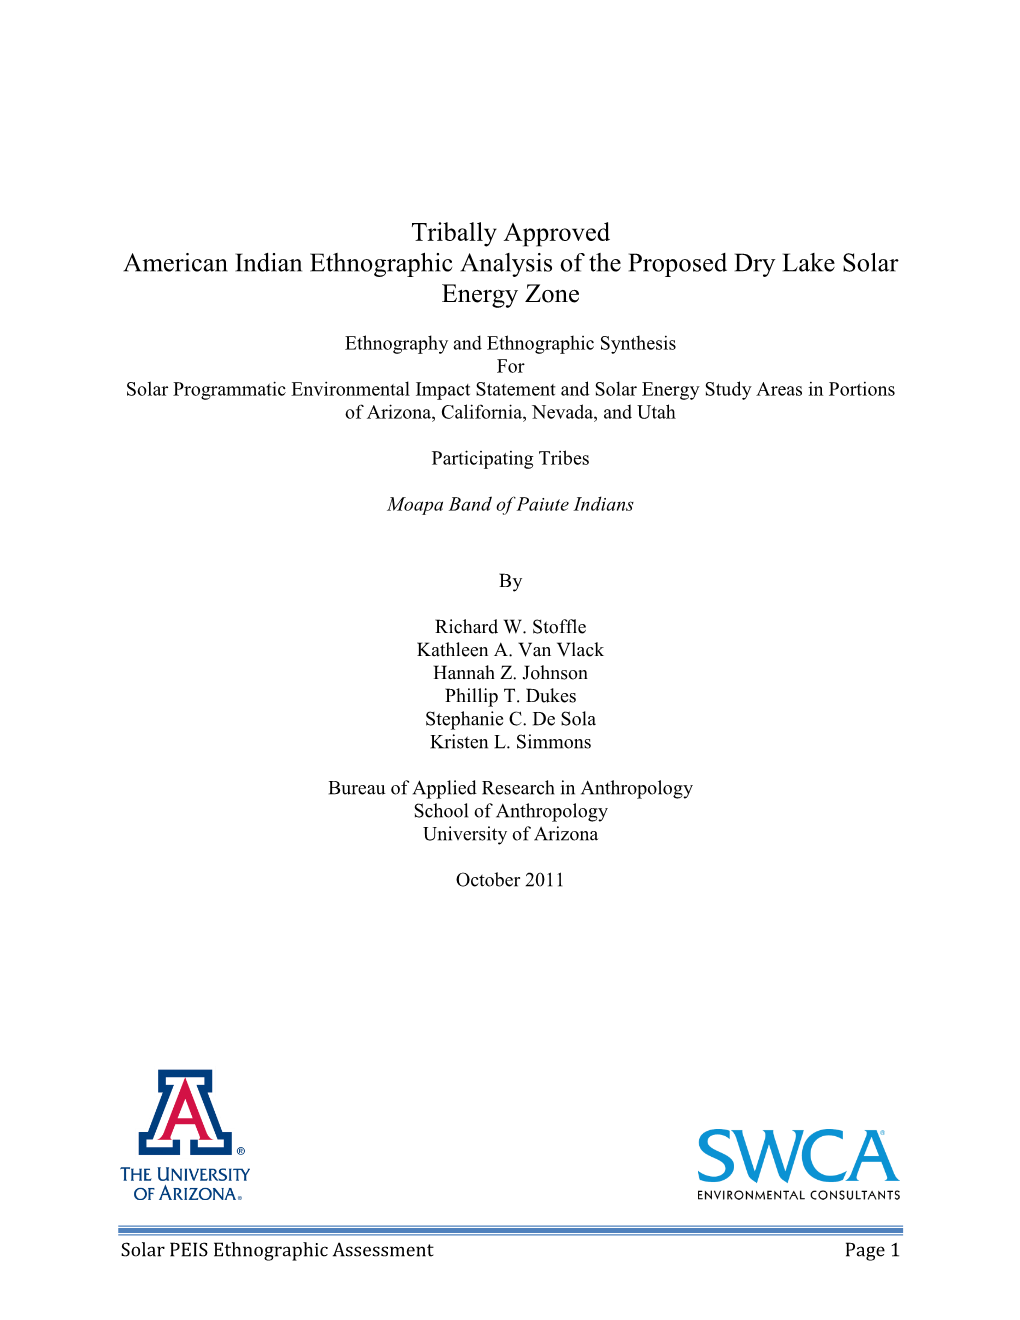 Tribally Approved American Indian Ethnographic Analysis of the Proposed Dry Lake Solar Energy Zone